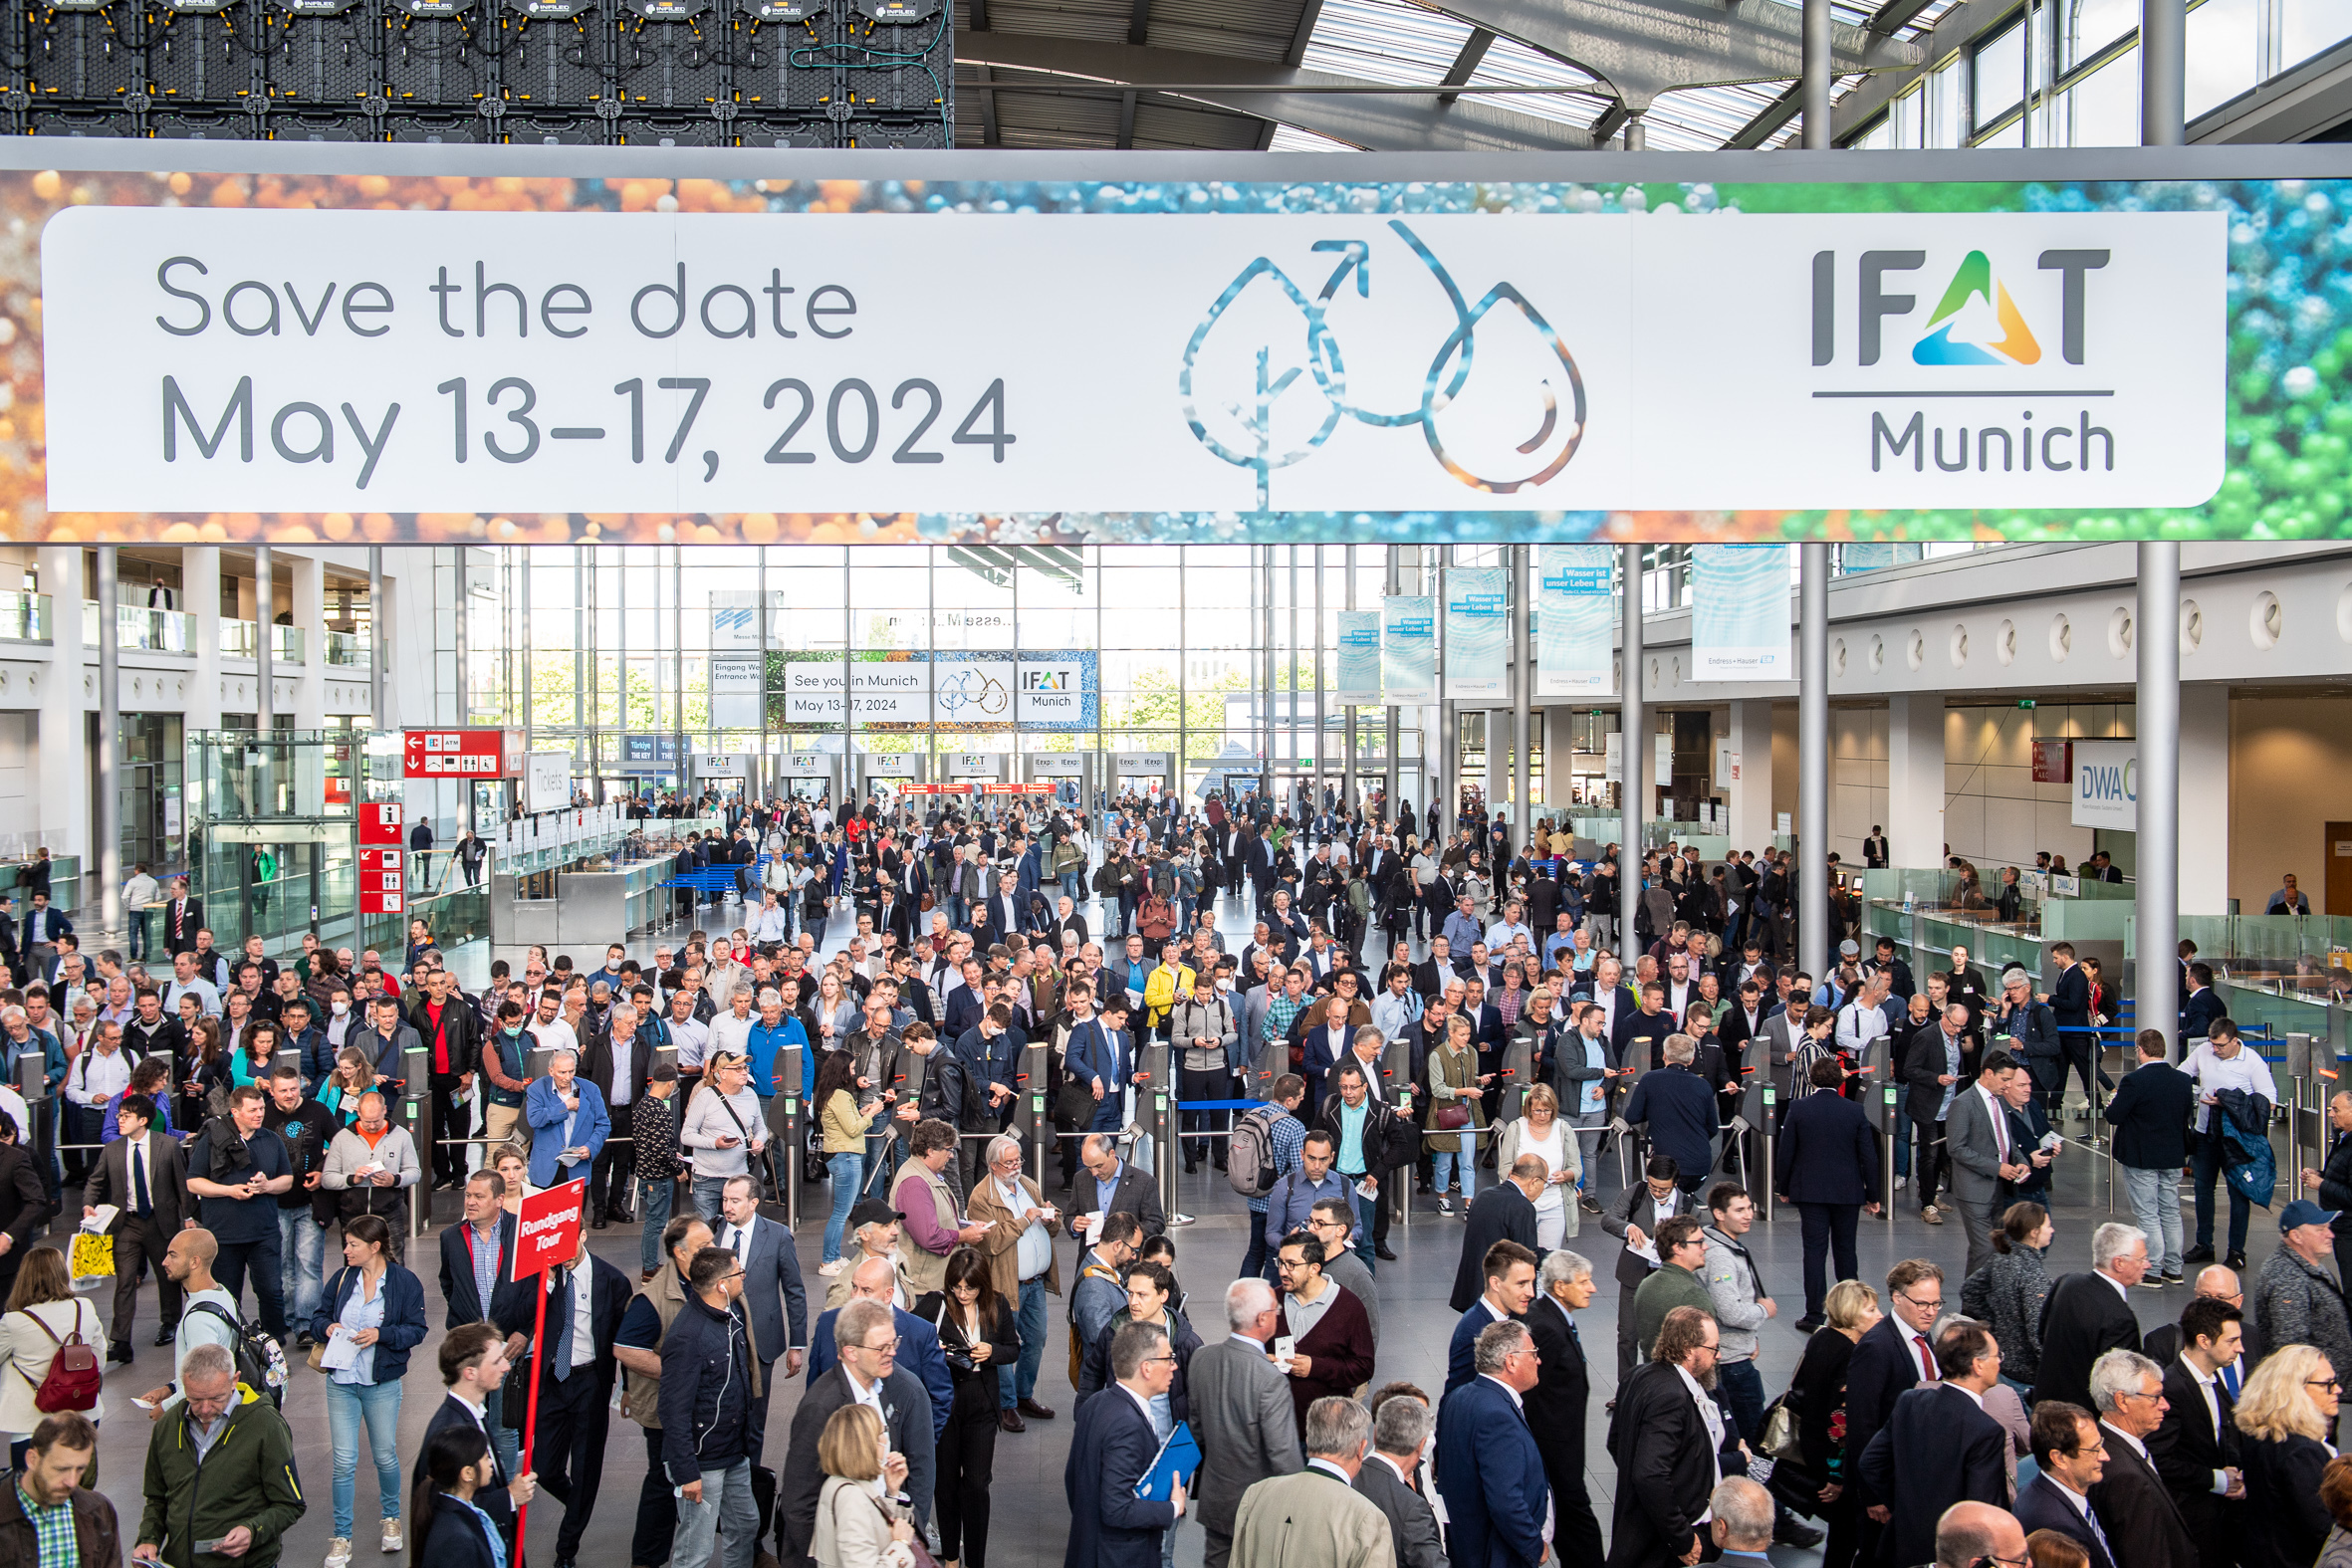 OUR COMPANY INVITES YOU IN IFAT 2024 (Munich)